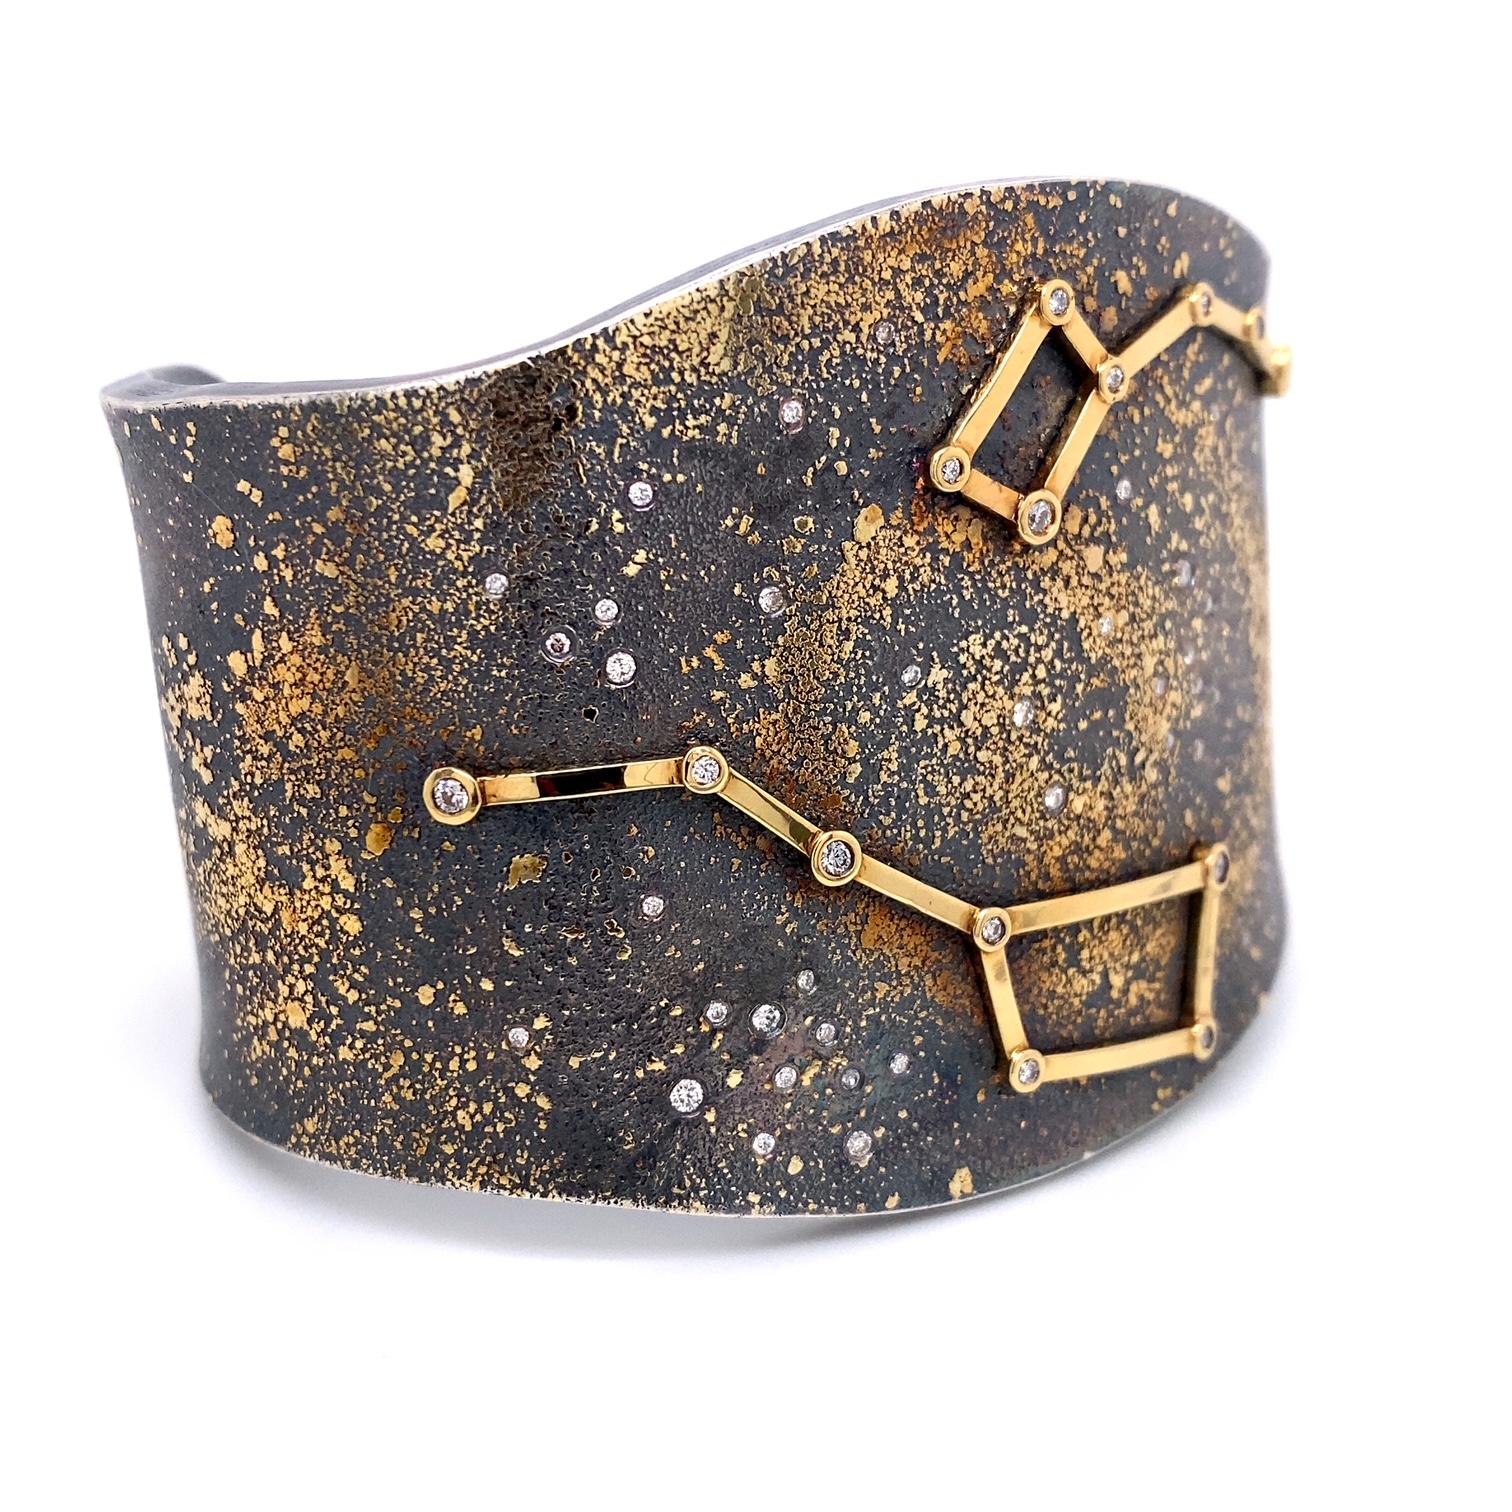 An oxidized sterling silver cuff bracelet with 18k yellow gold Ursa Major and Ursa Minor constellations, a 24k gold Milky Way Galaxy in the background, and set with 0.47 total carat weight round full cut white diamonds F color VS clarity. Designed